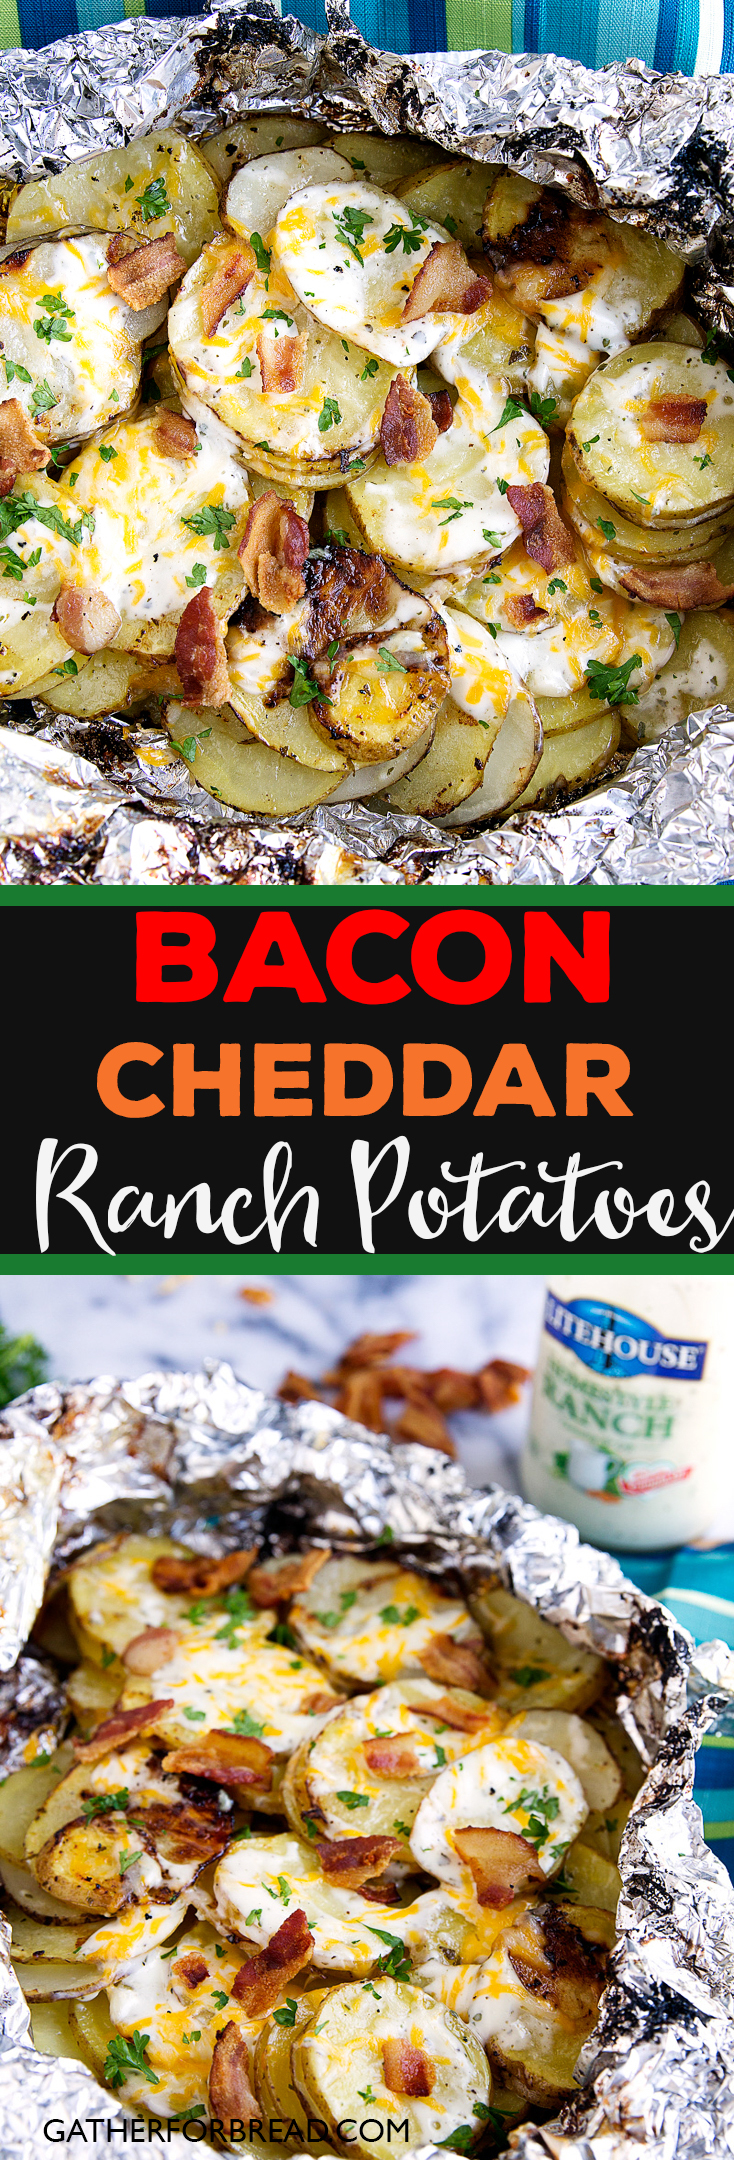 Bacon Ranch Grilled Potatoes - Sliced potatoes flavored with real Ranch dressing, bacon and cheese for an ultimate summer grilled side dish.